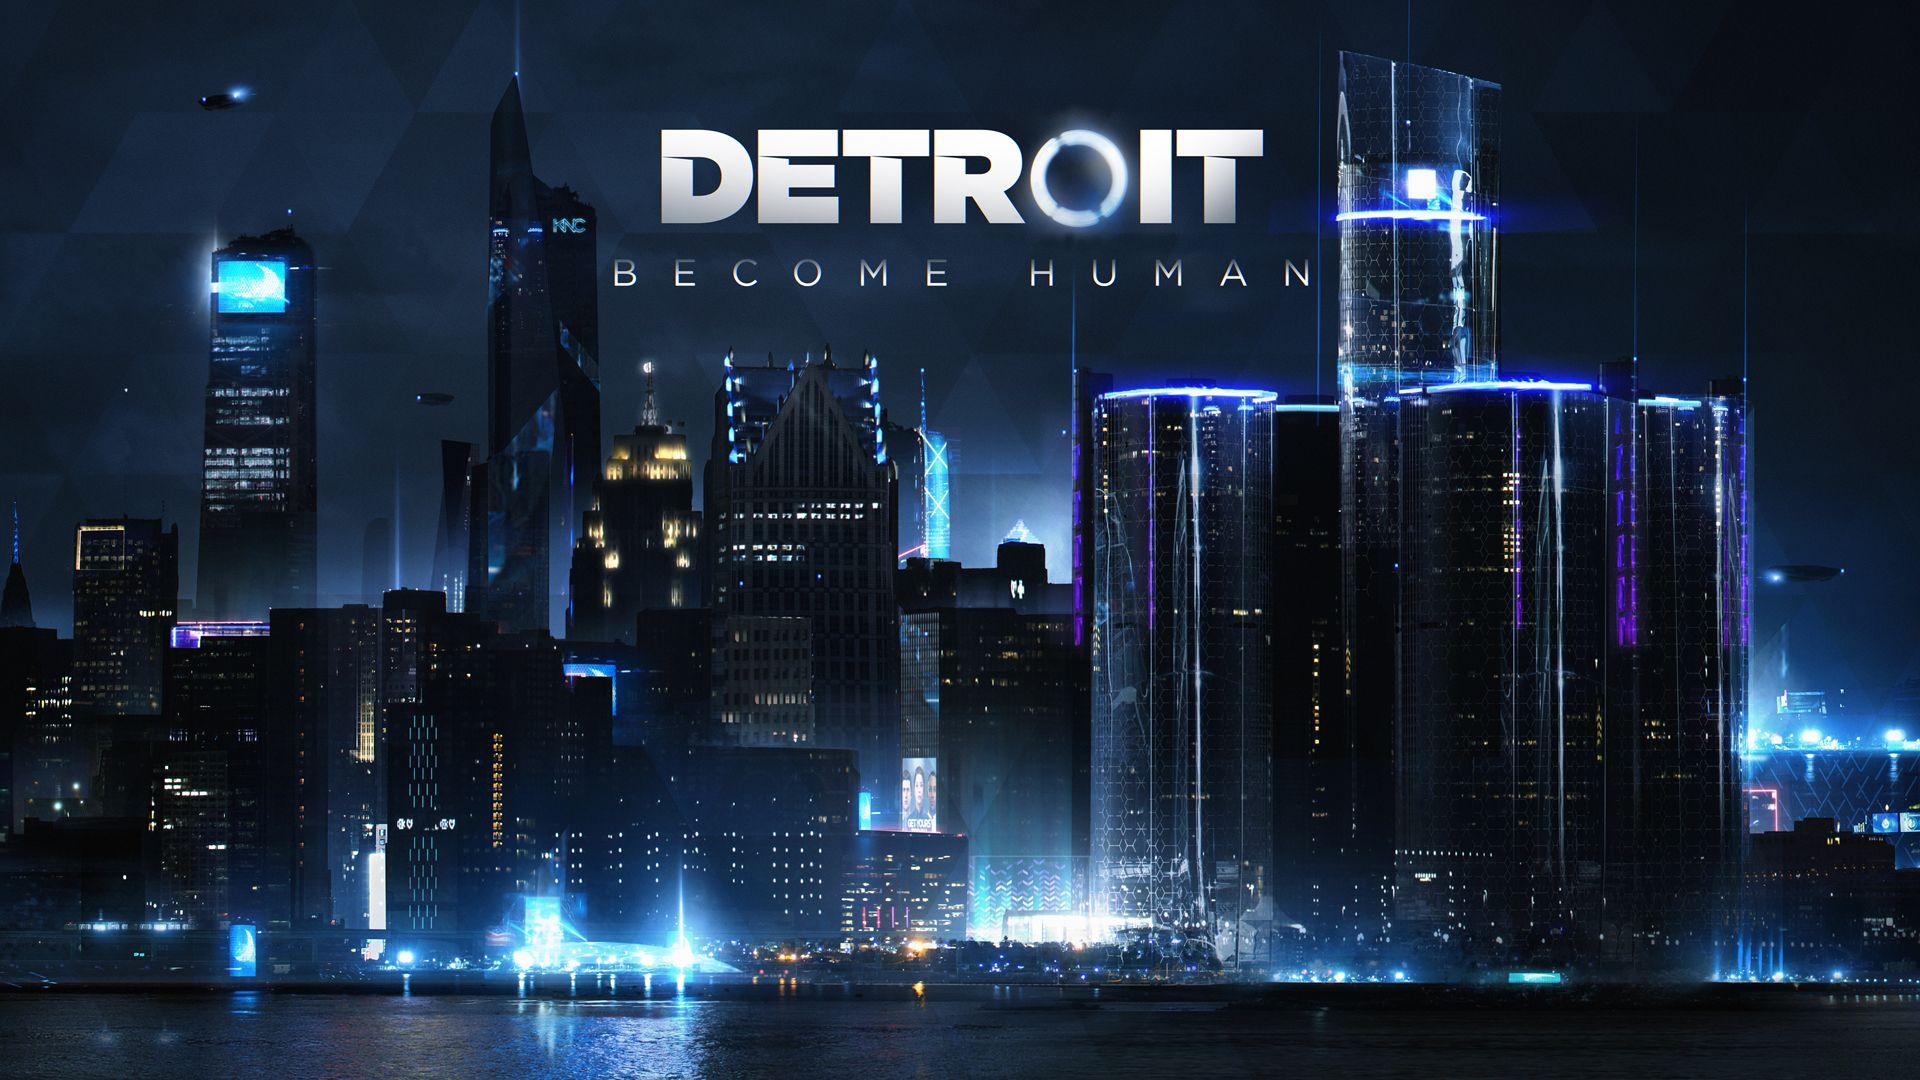 Detroit: Become Human image Wallpaper HD wallpaper and background